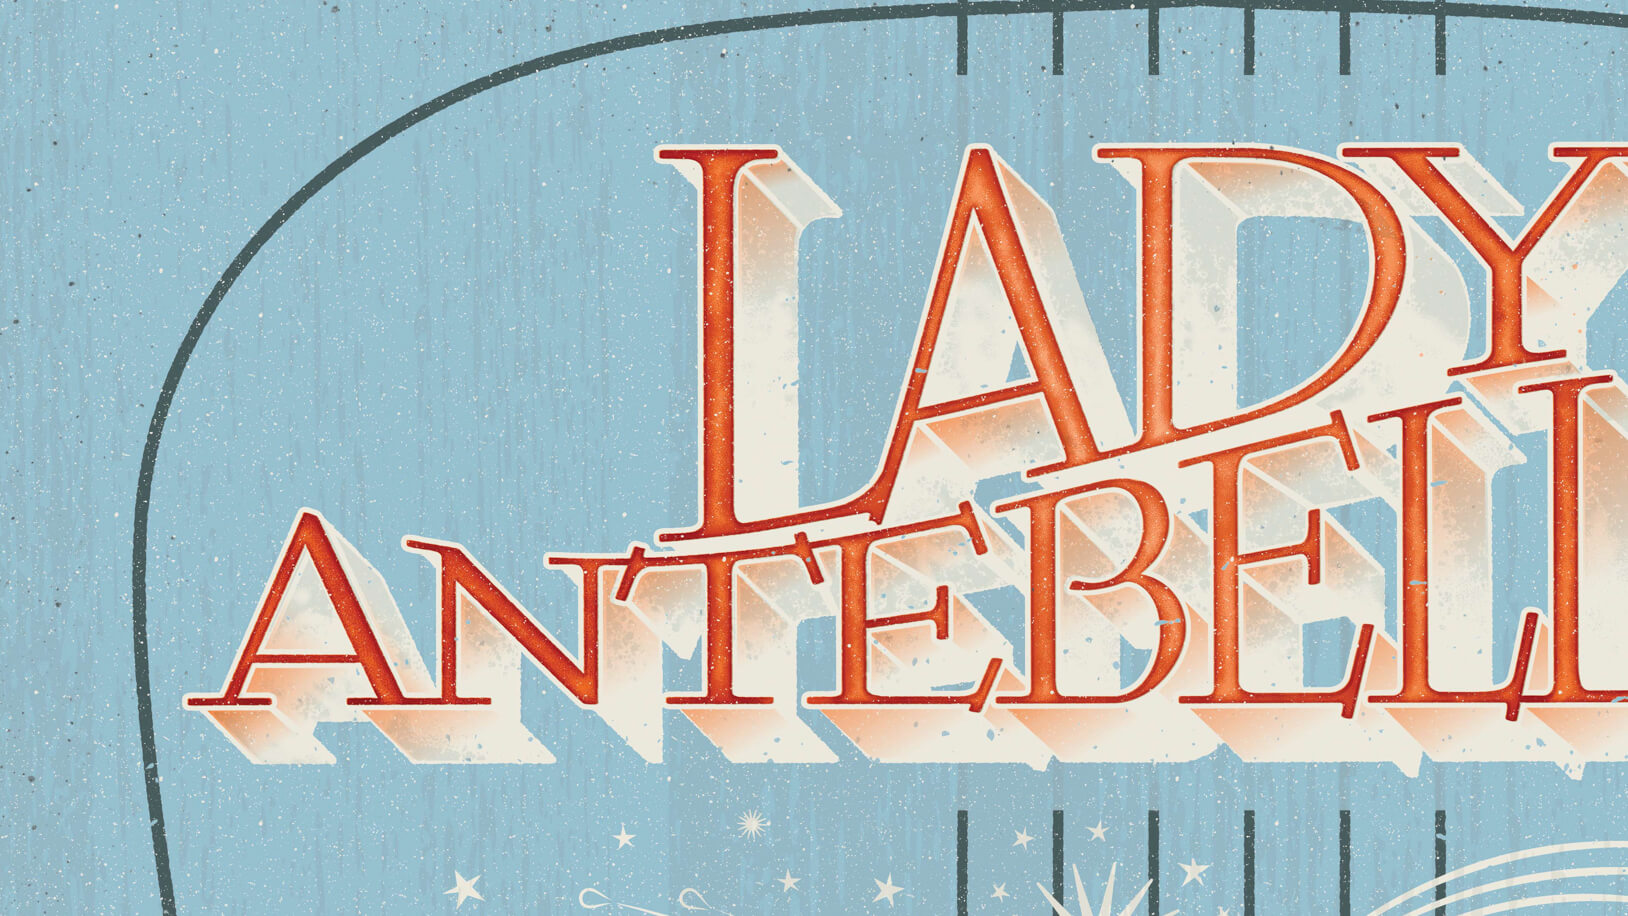 Detail image of custom typography for Lady Antebellum poster design